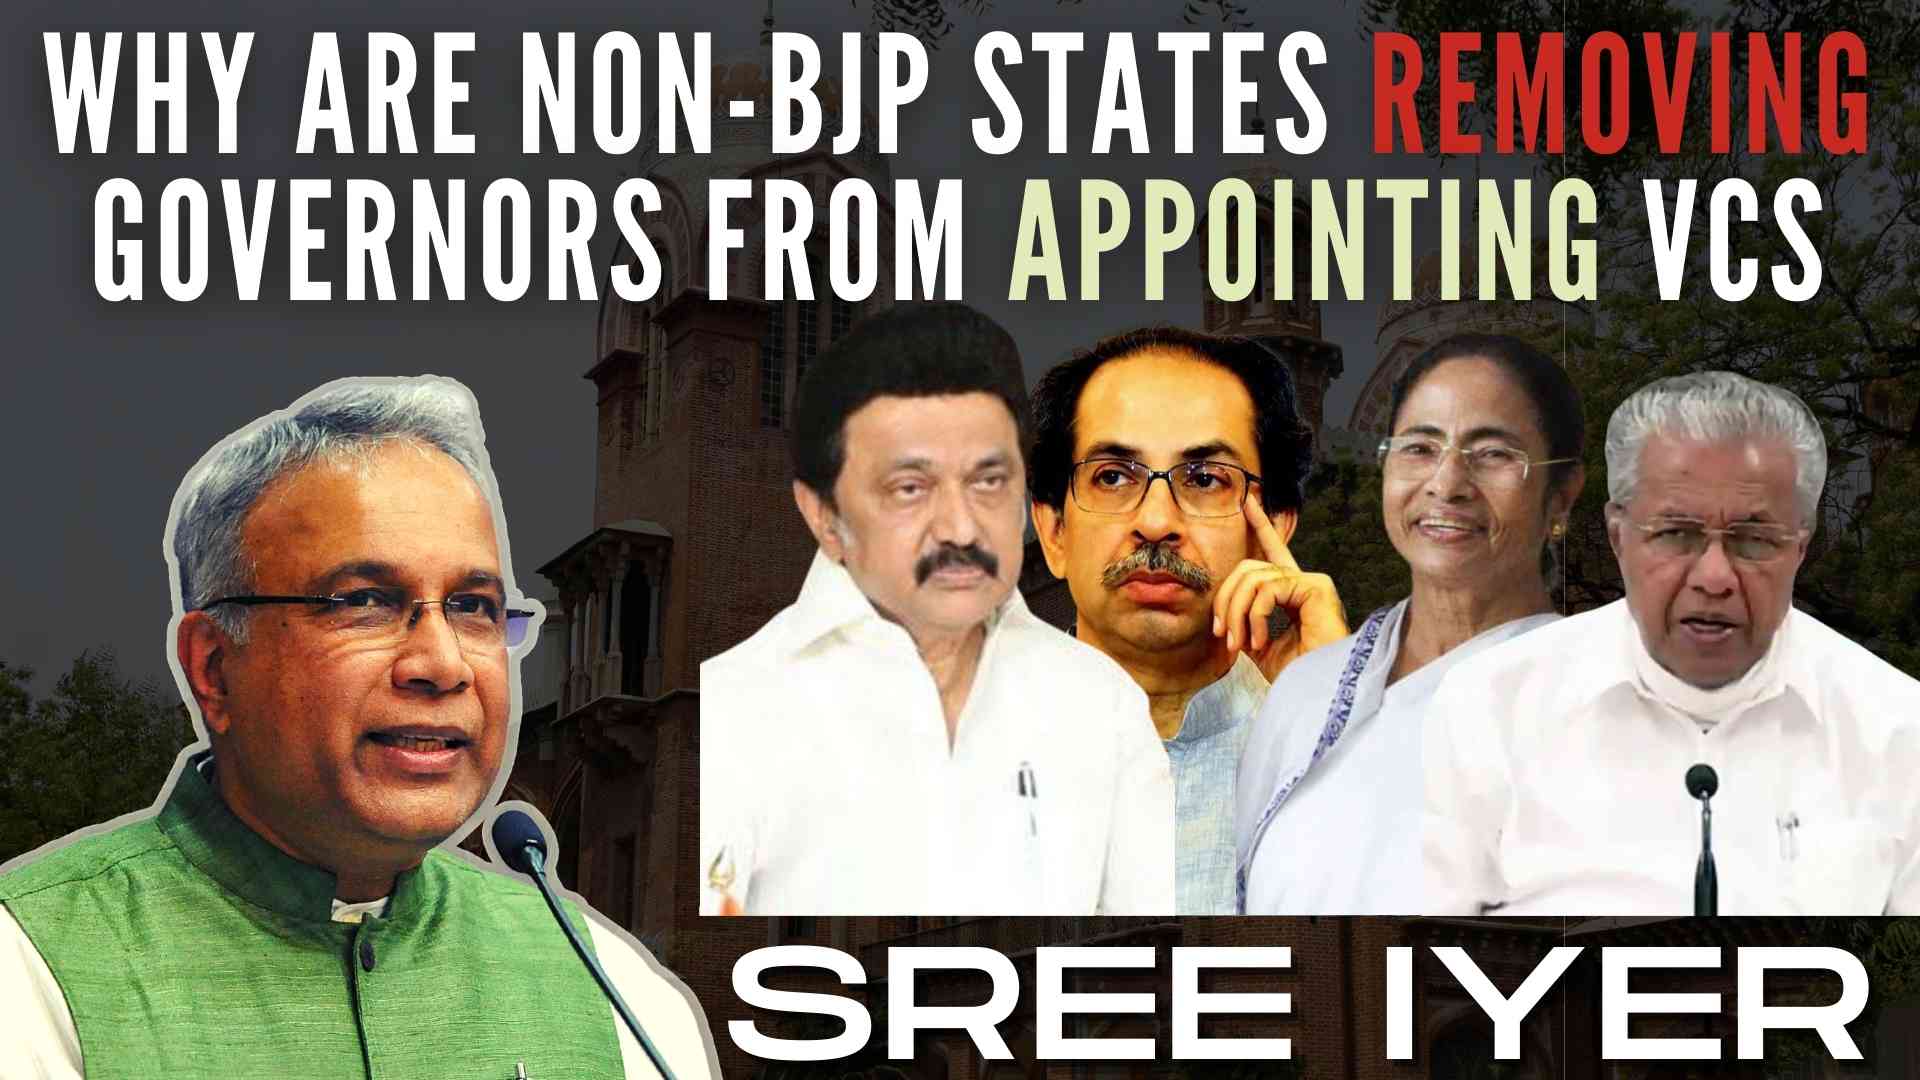 non bjp states | Why are regional party-run governments like DMK, TMC, CPI-M and MVA combo removing the Governor from appointing Vice Chancellors?